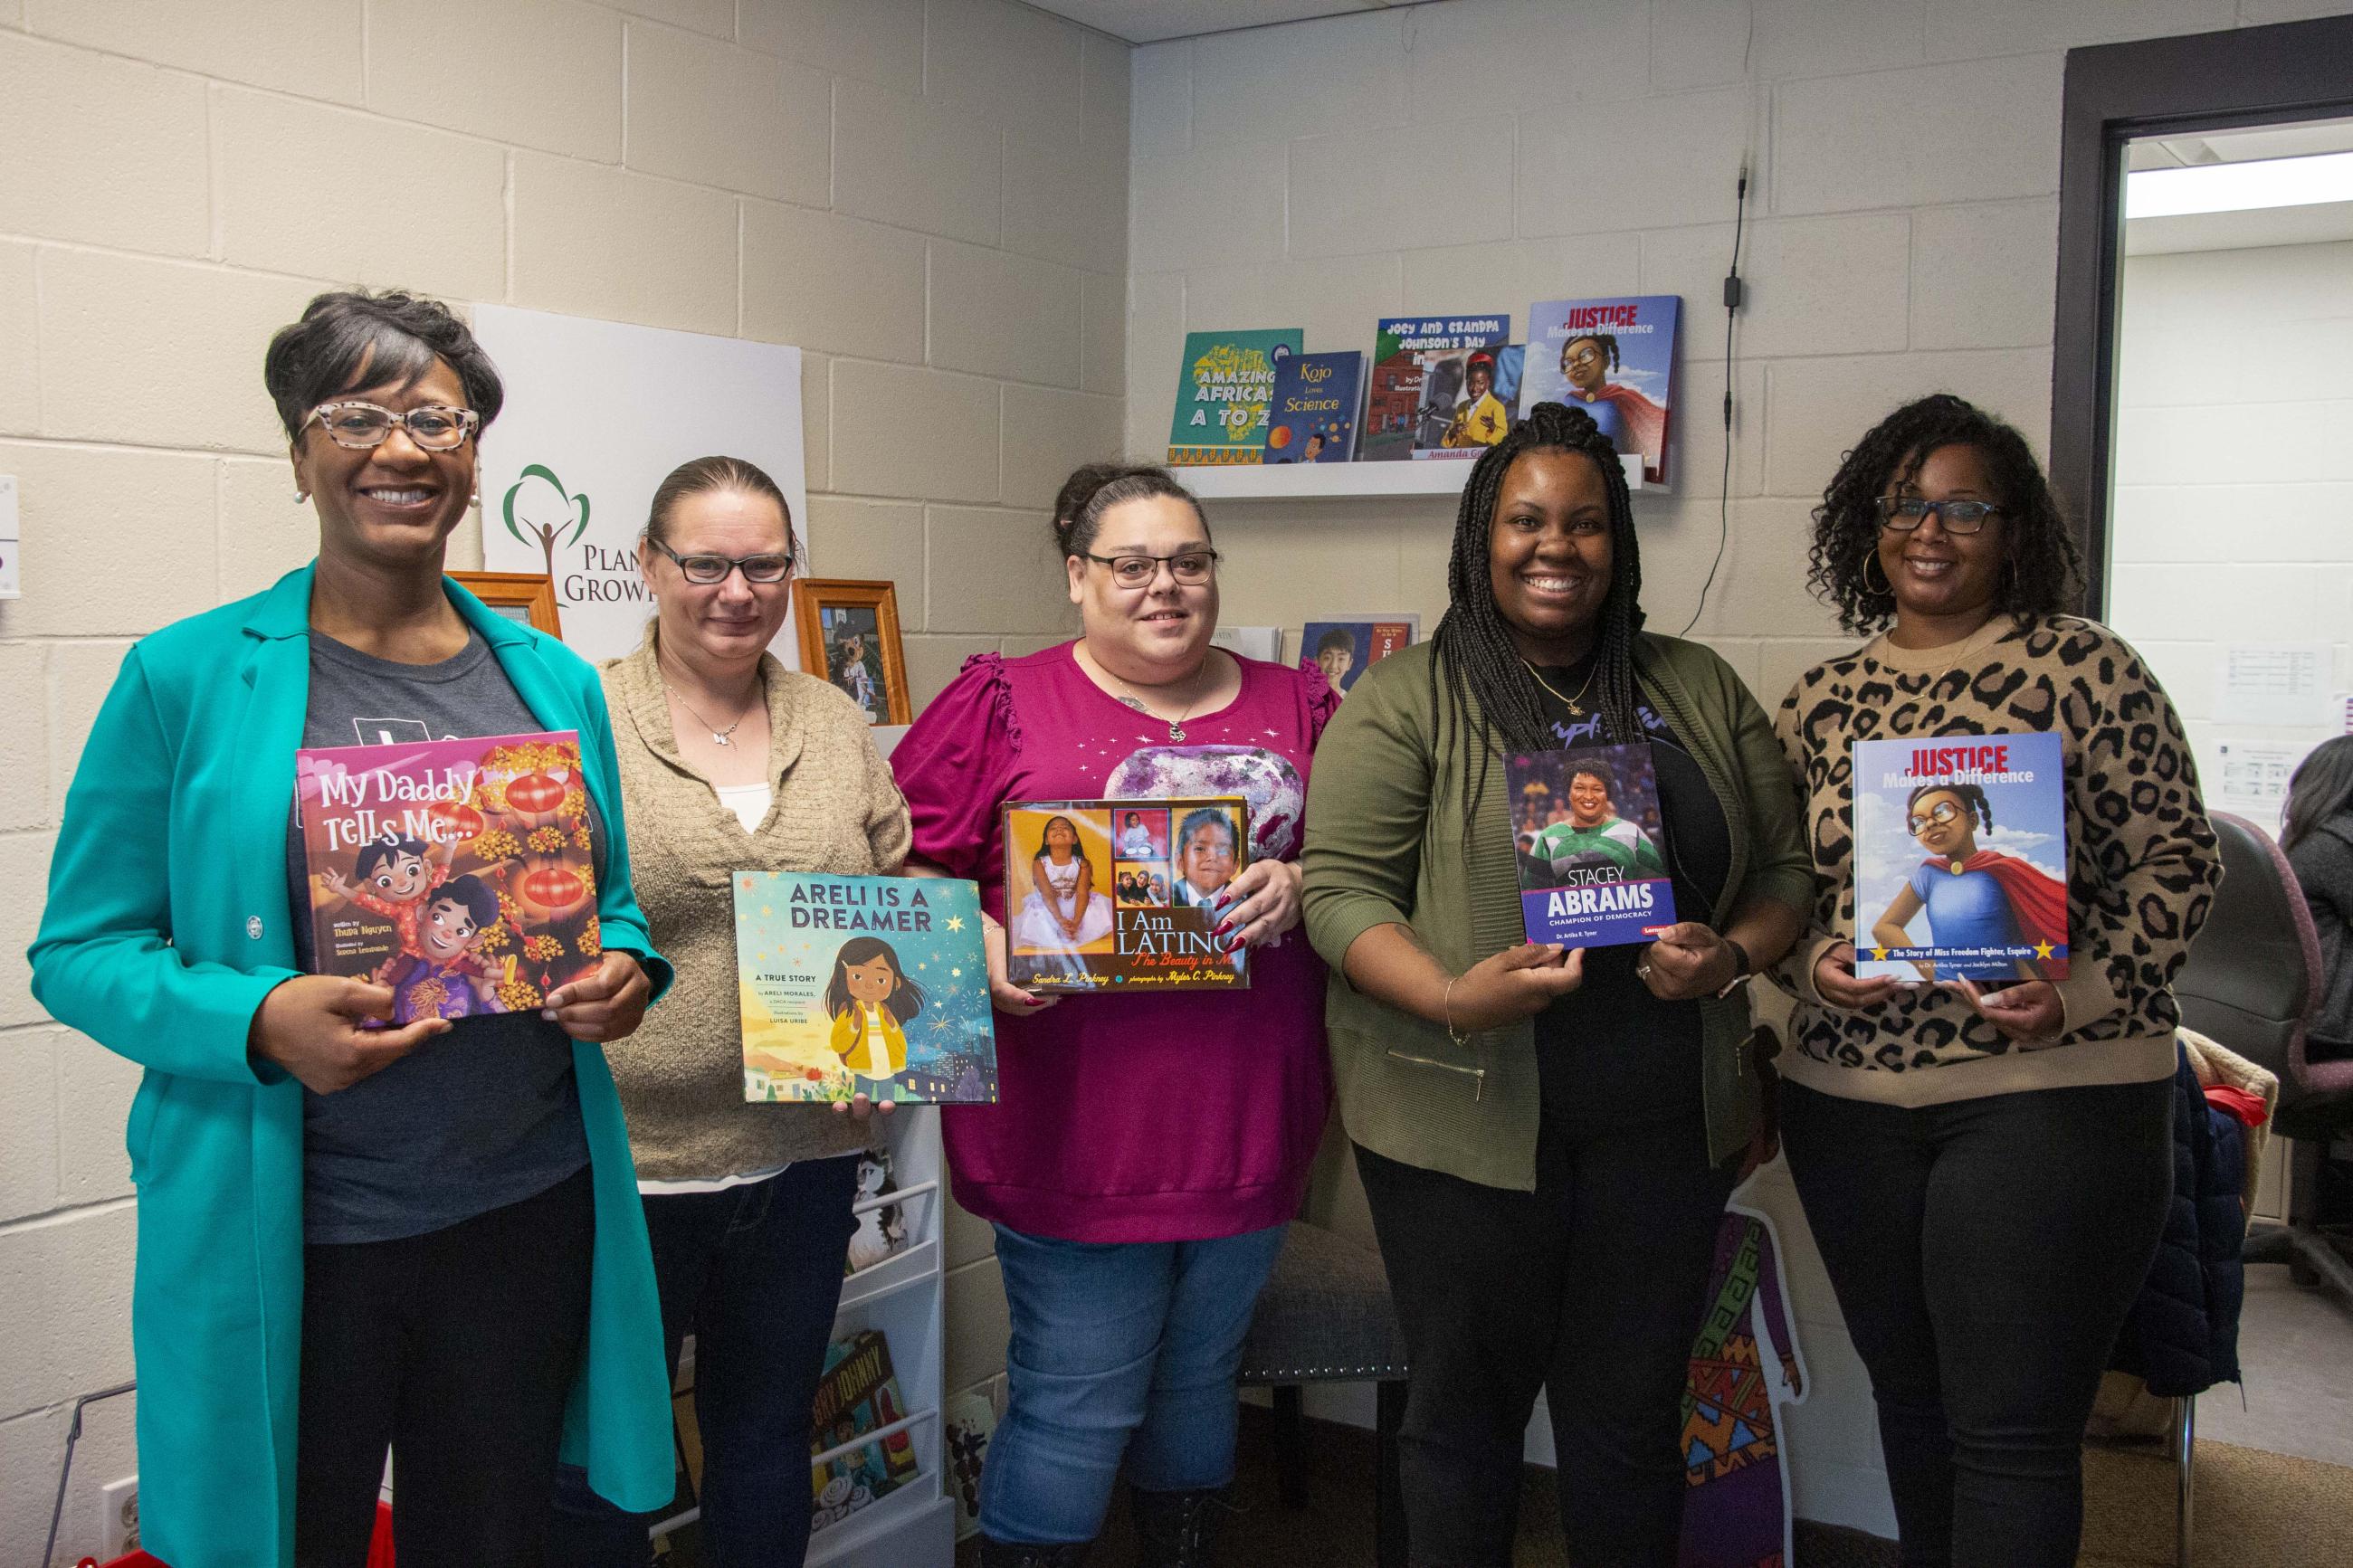 Five women posing together in the RAW Library at the Wilder Child Development Center